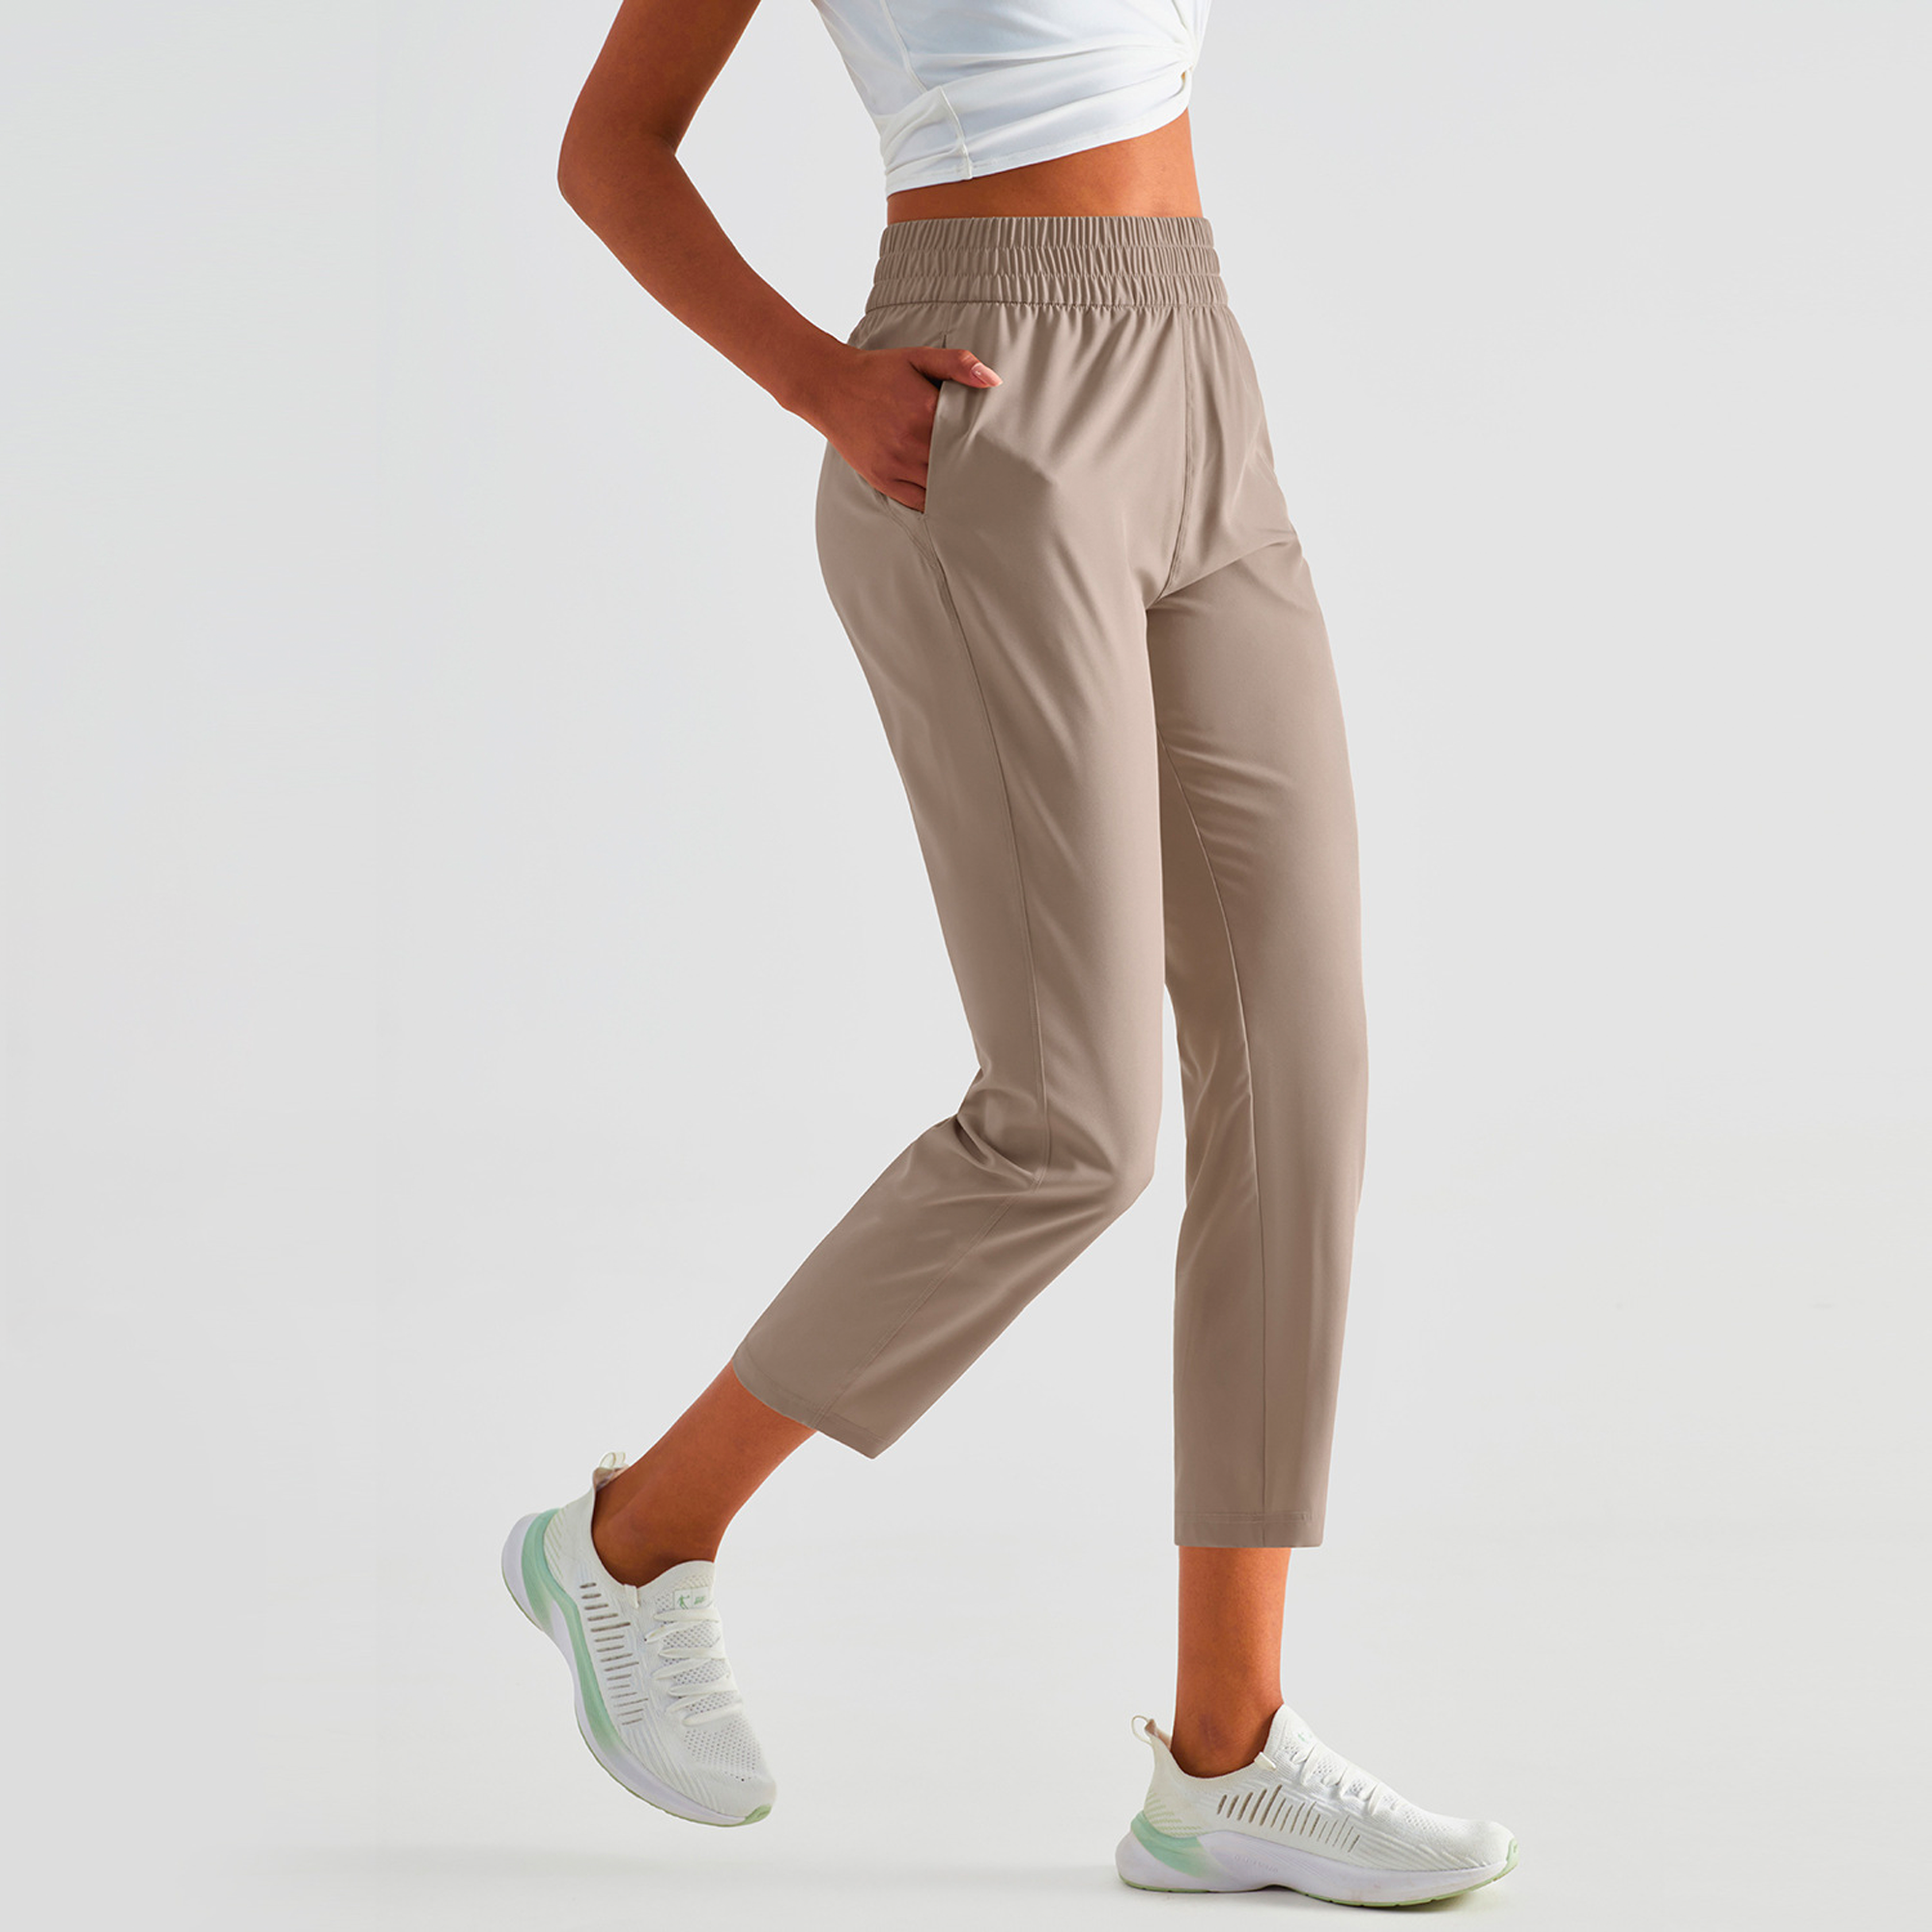 Women's Casual Sports Pant, Best Yoga, Sports, Workout, Running